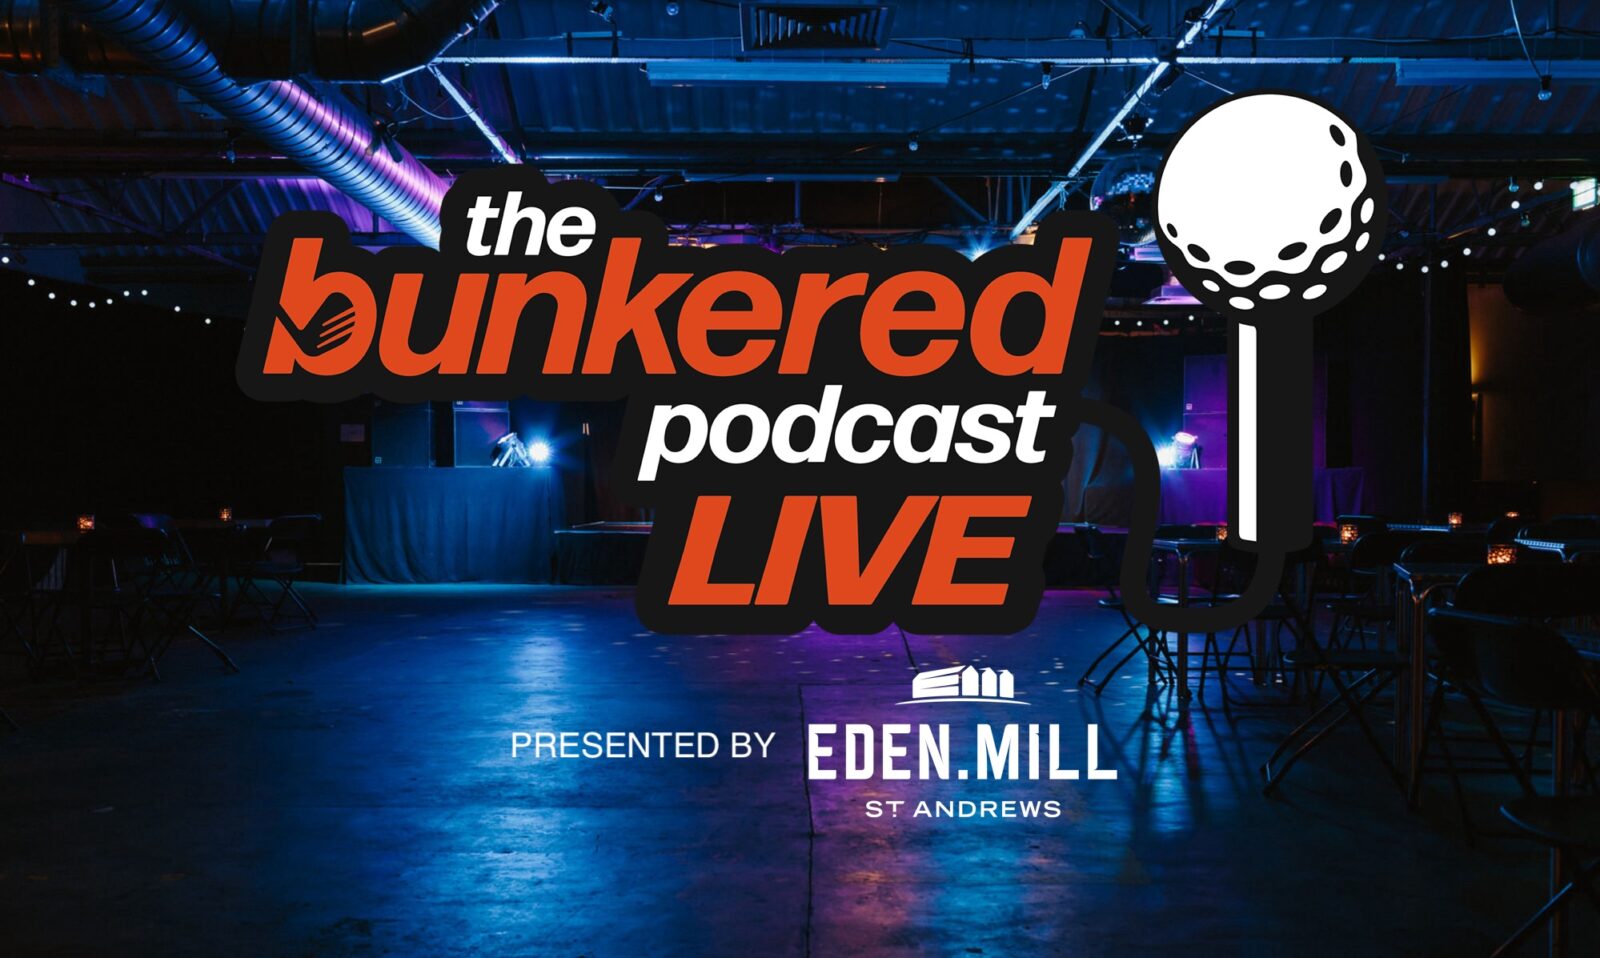 Bunkered podcast live new main